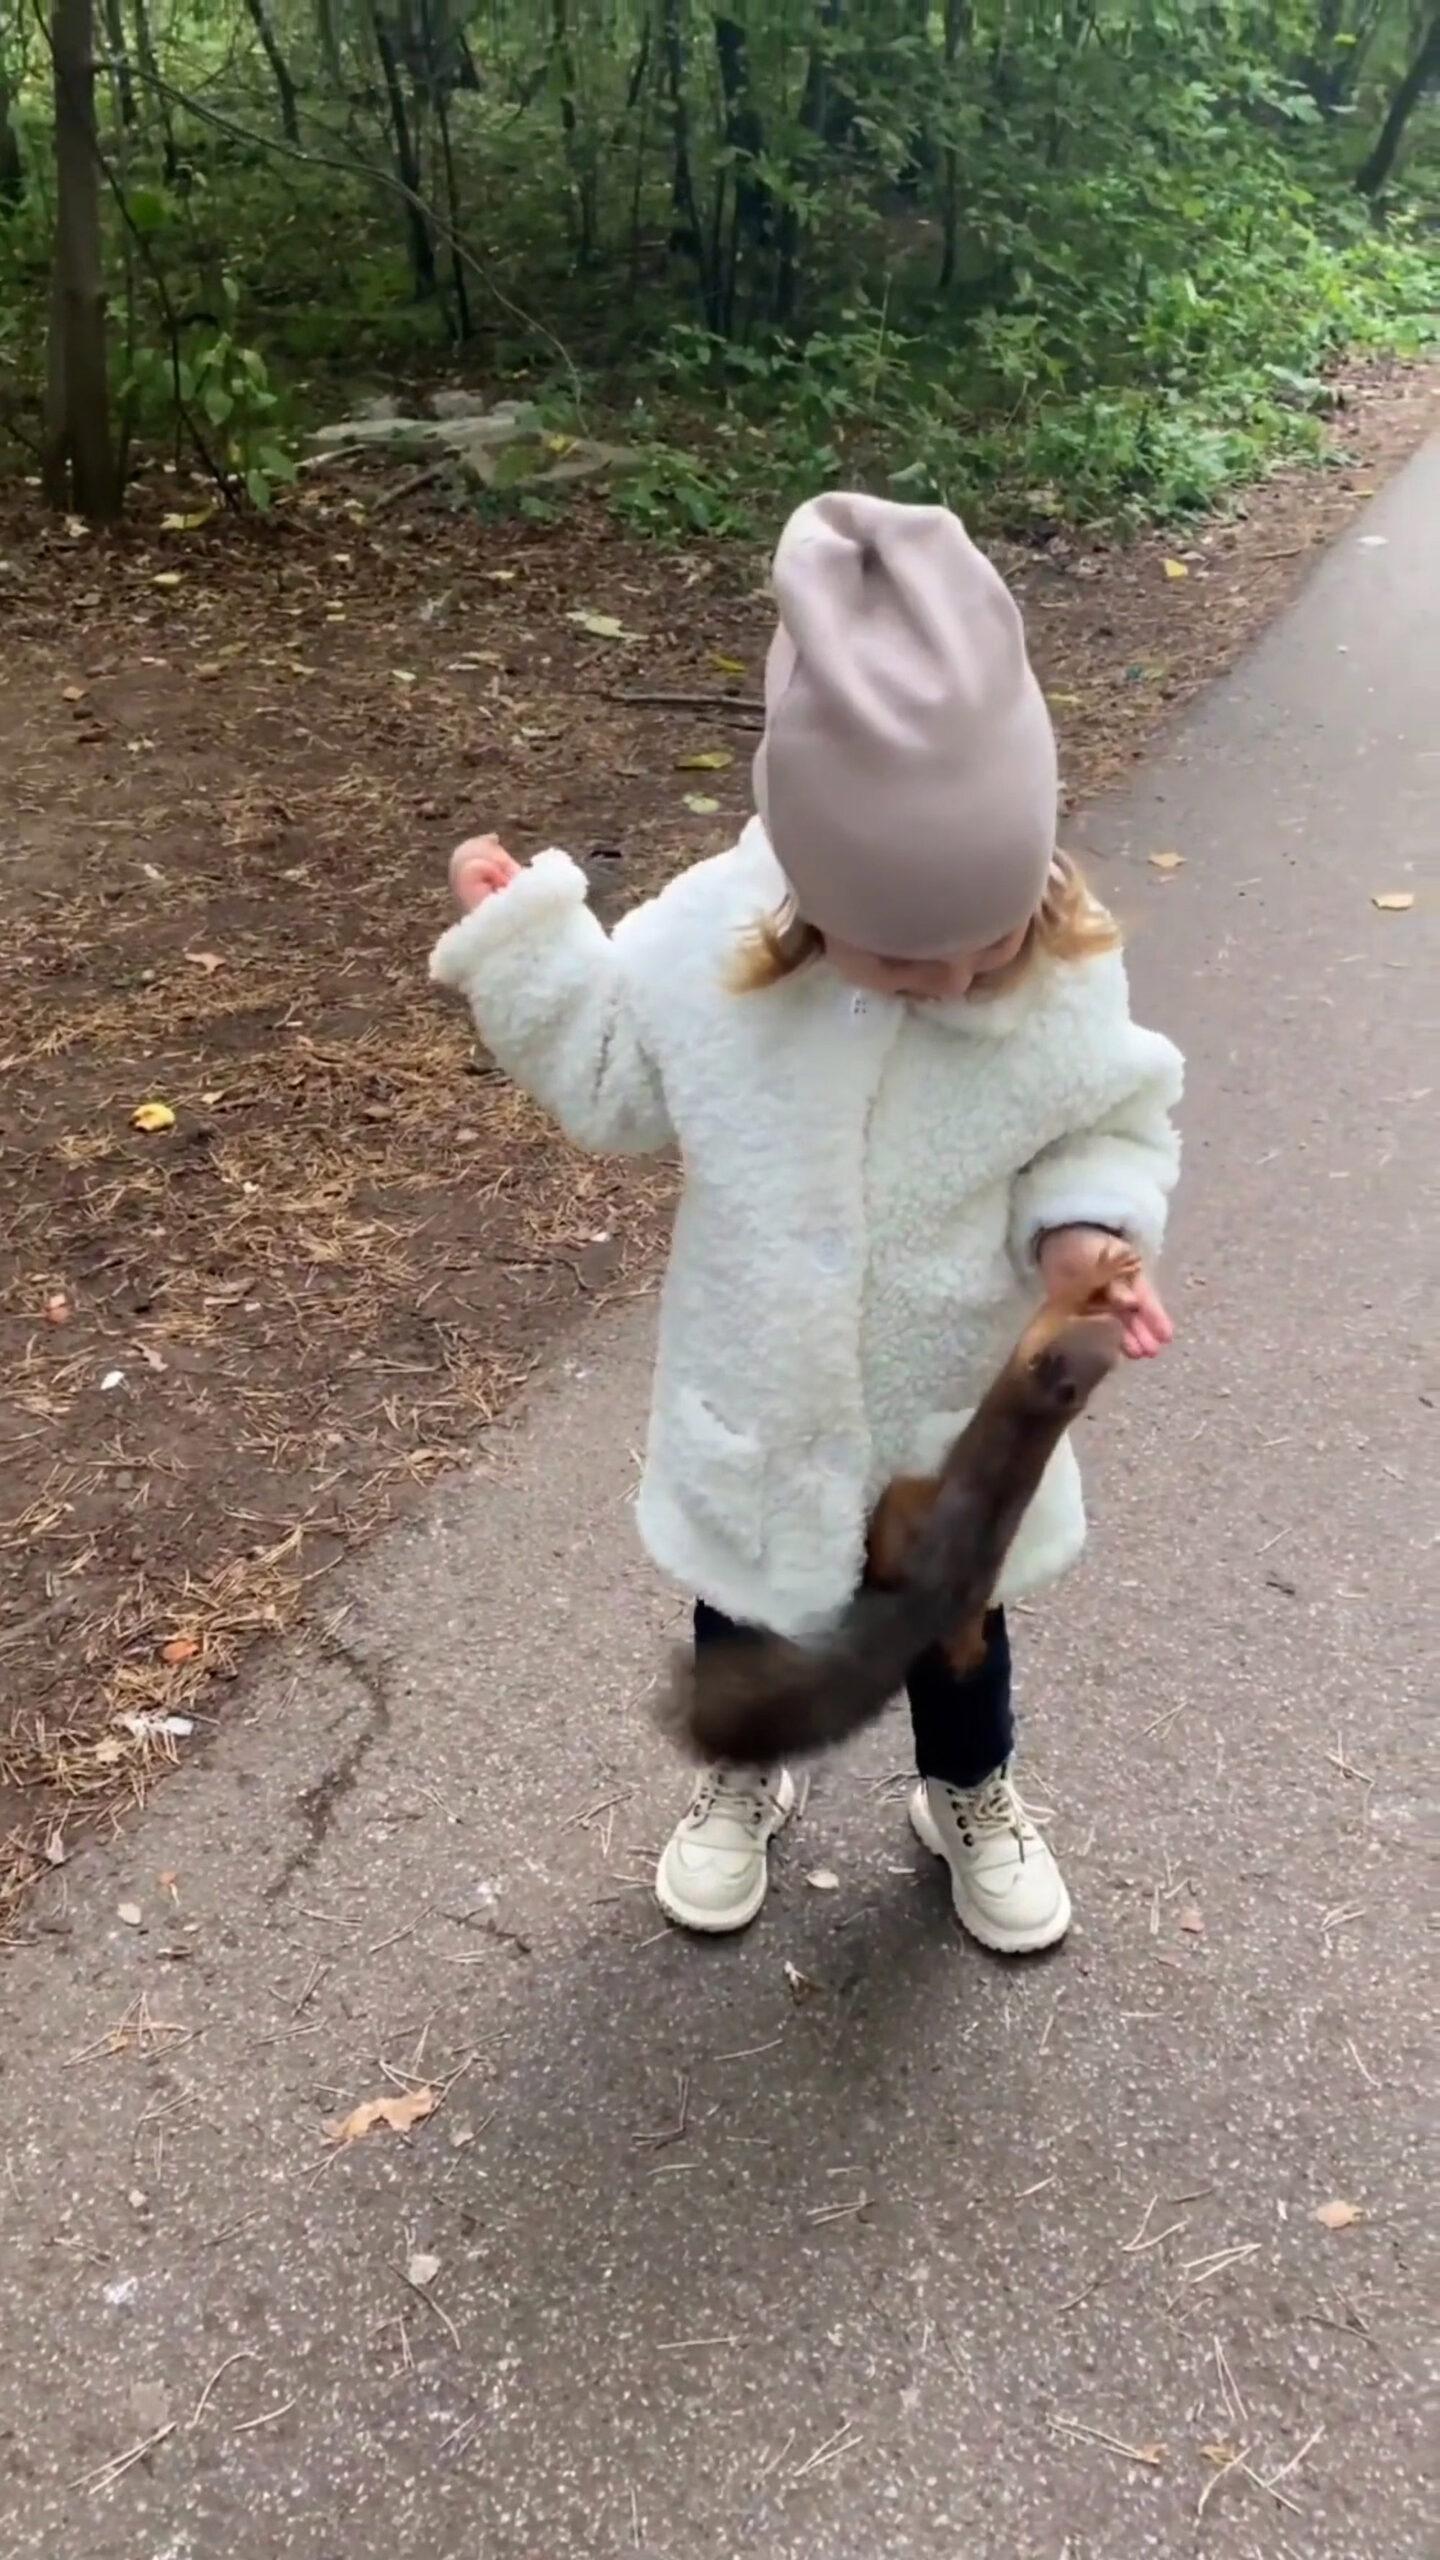 Read more about the article I’M JUST NUTTY ABOUT YOU: Adorable Three-Year-Old Girl’s Bond With Squirrel